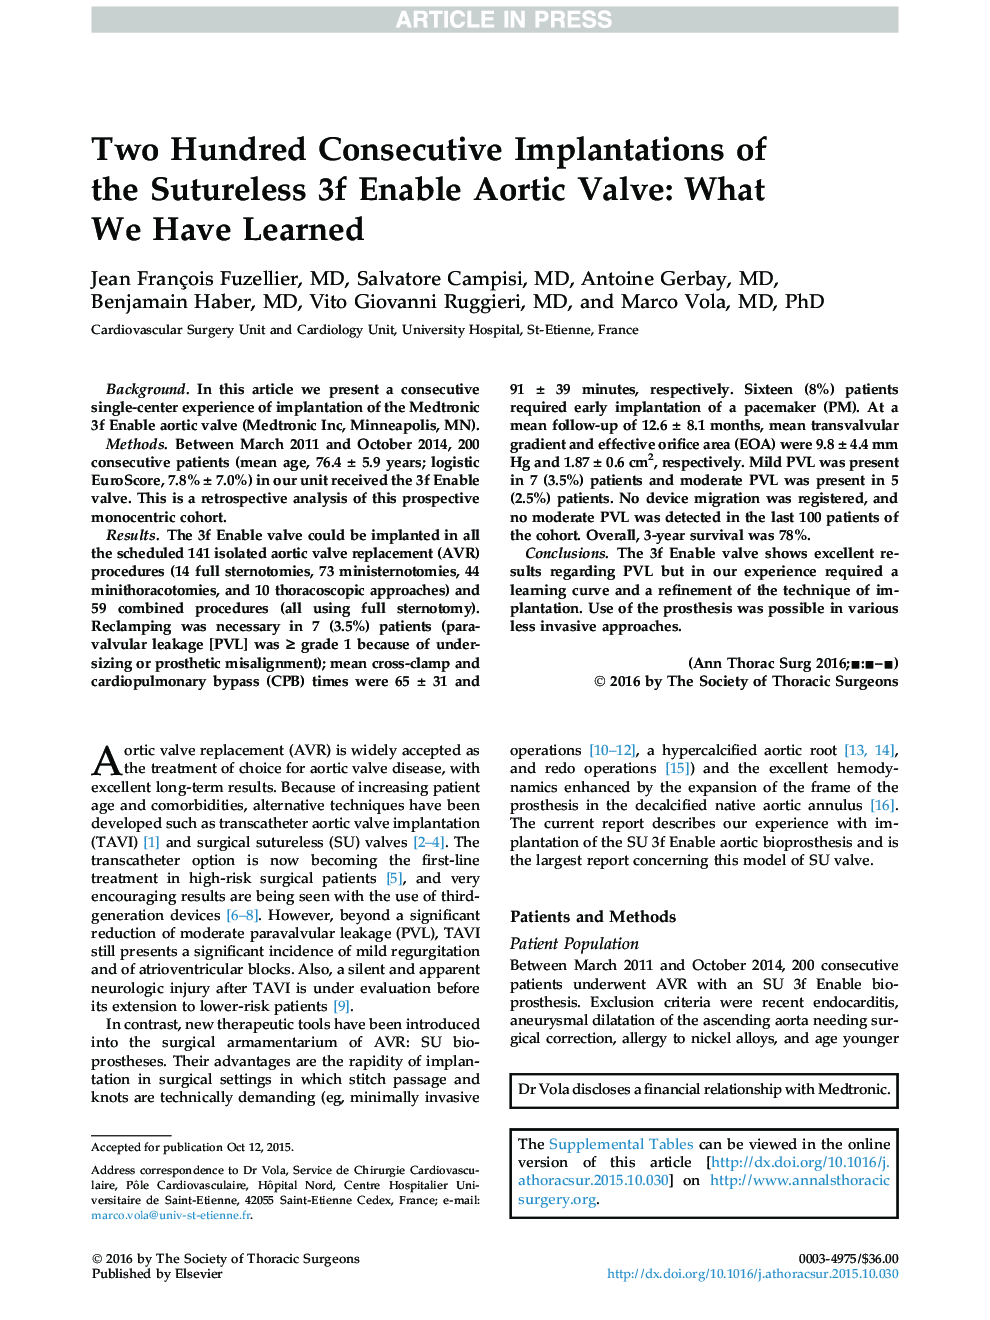 Two Hundred Consecutive Implantations of theÂ Sutureless 3f Enable Aortic Valve: What WeÂ Have Learned